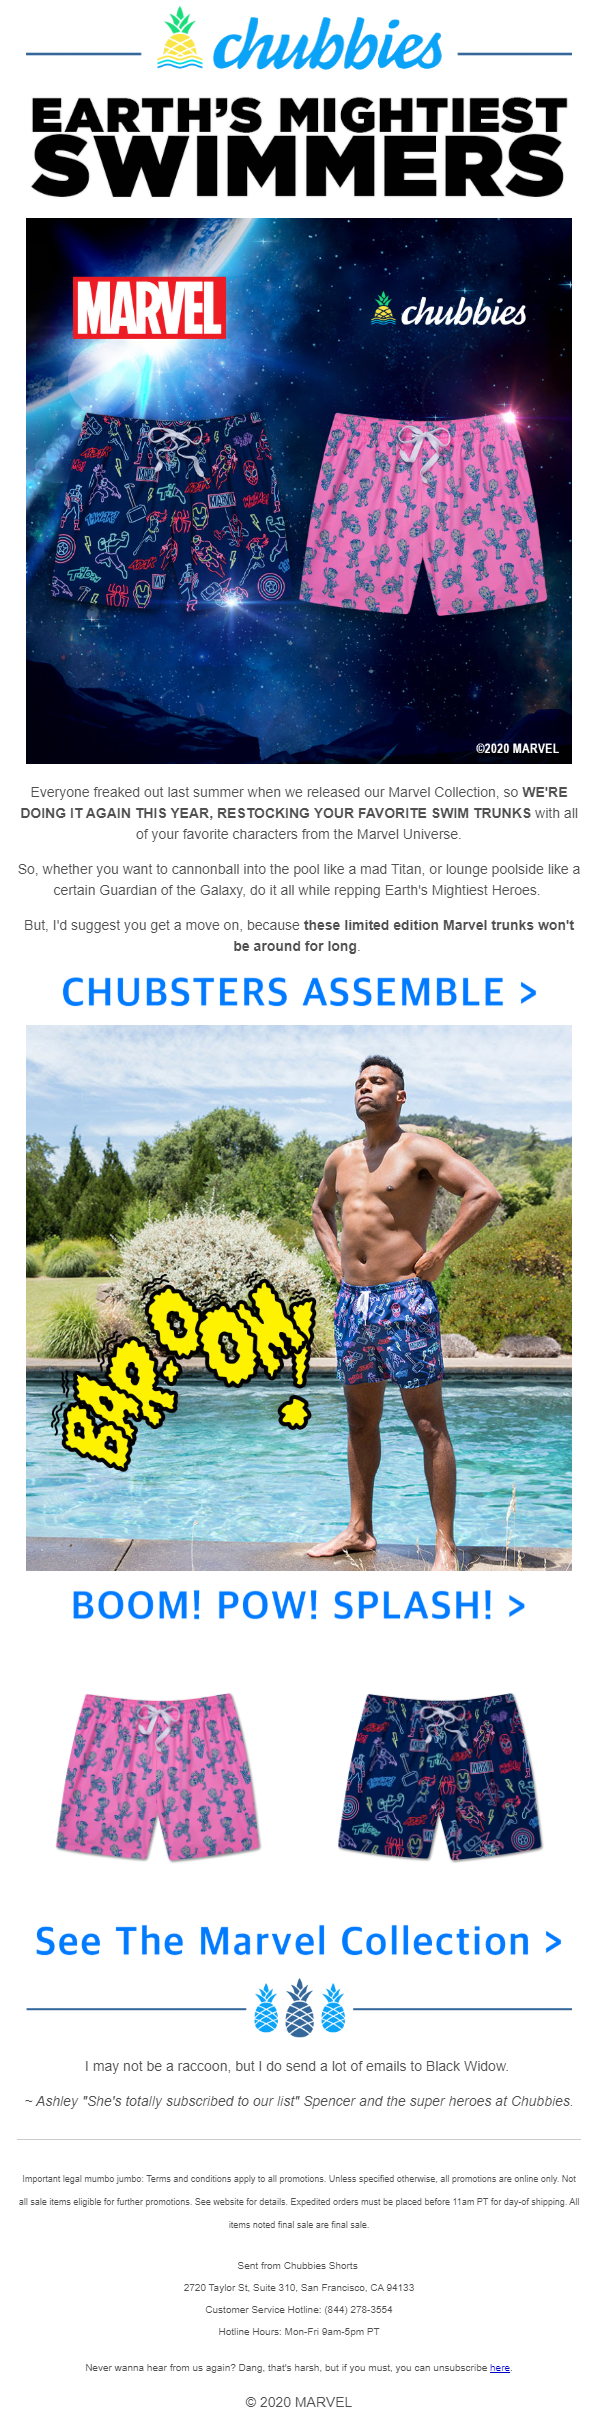 ecommerce email marketing campaign example chubbies